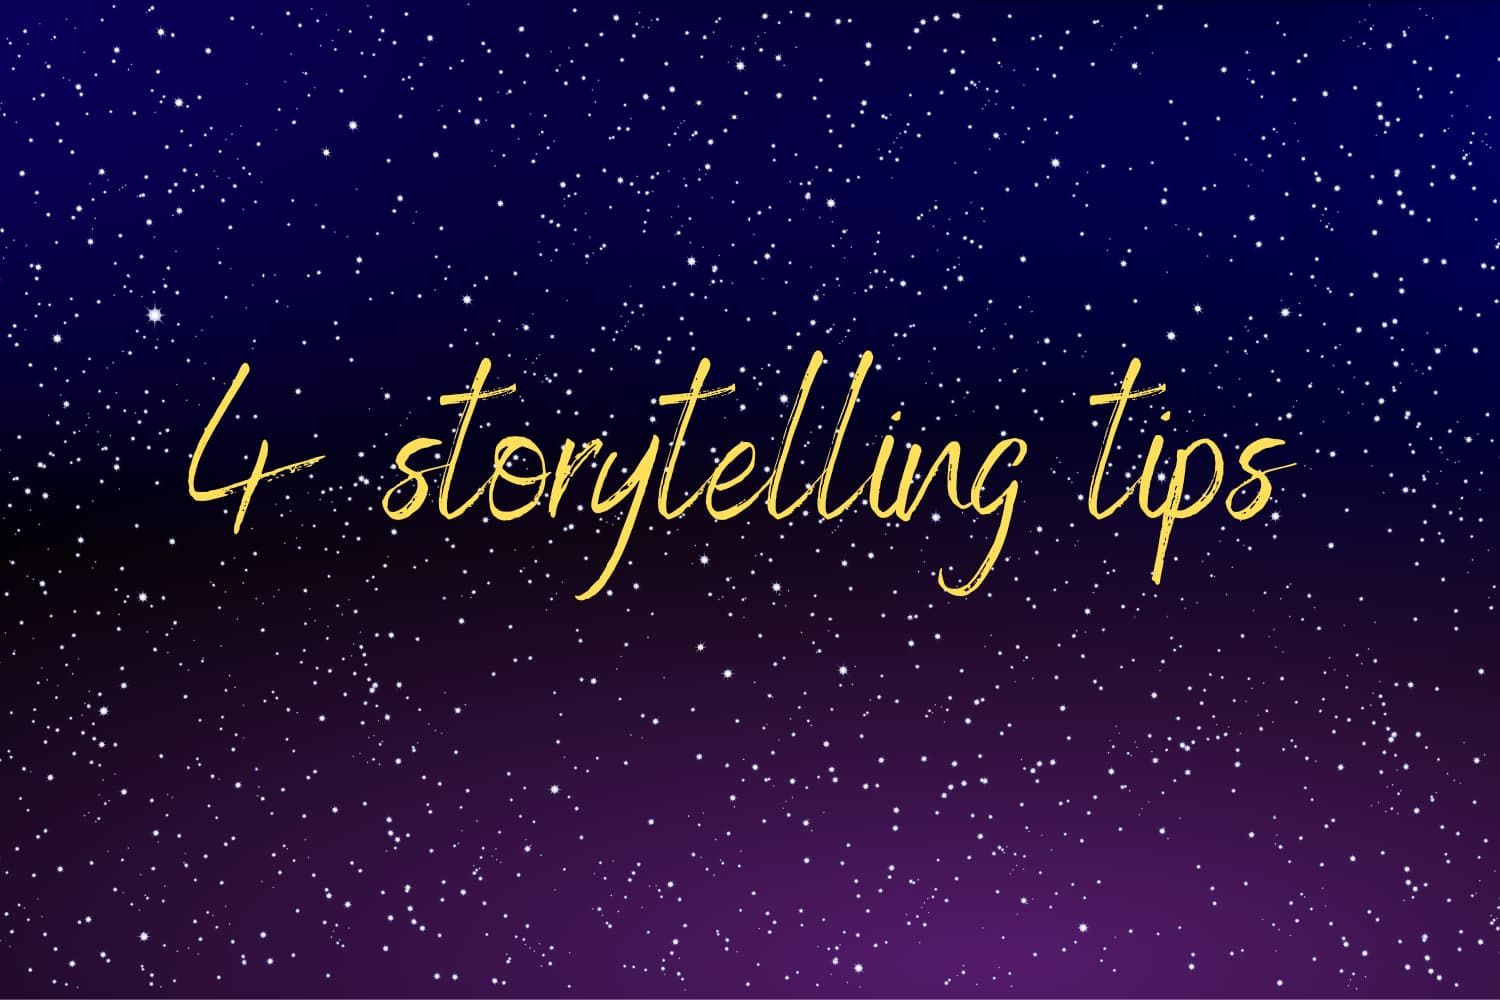 Four%20storytelling%20tips%20Bible%20story%20abram%20counts%20the%20stars-337dea3d Trust